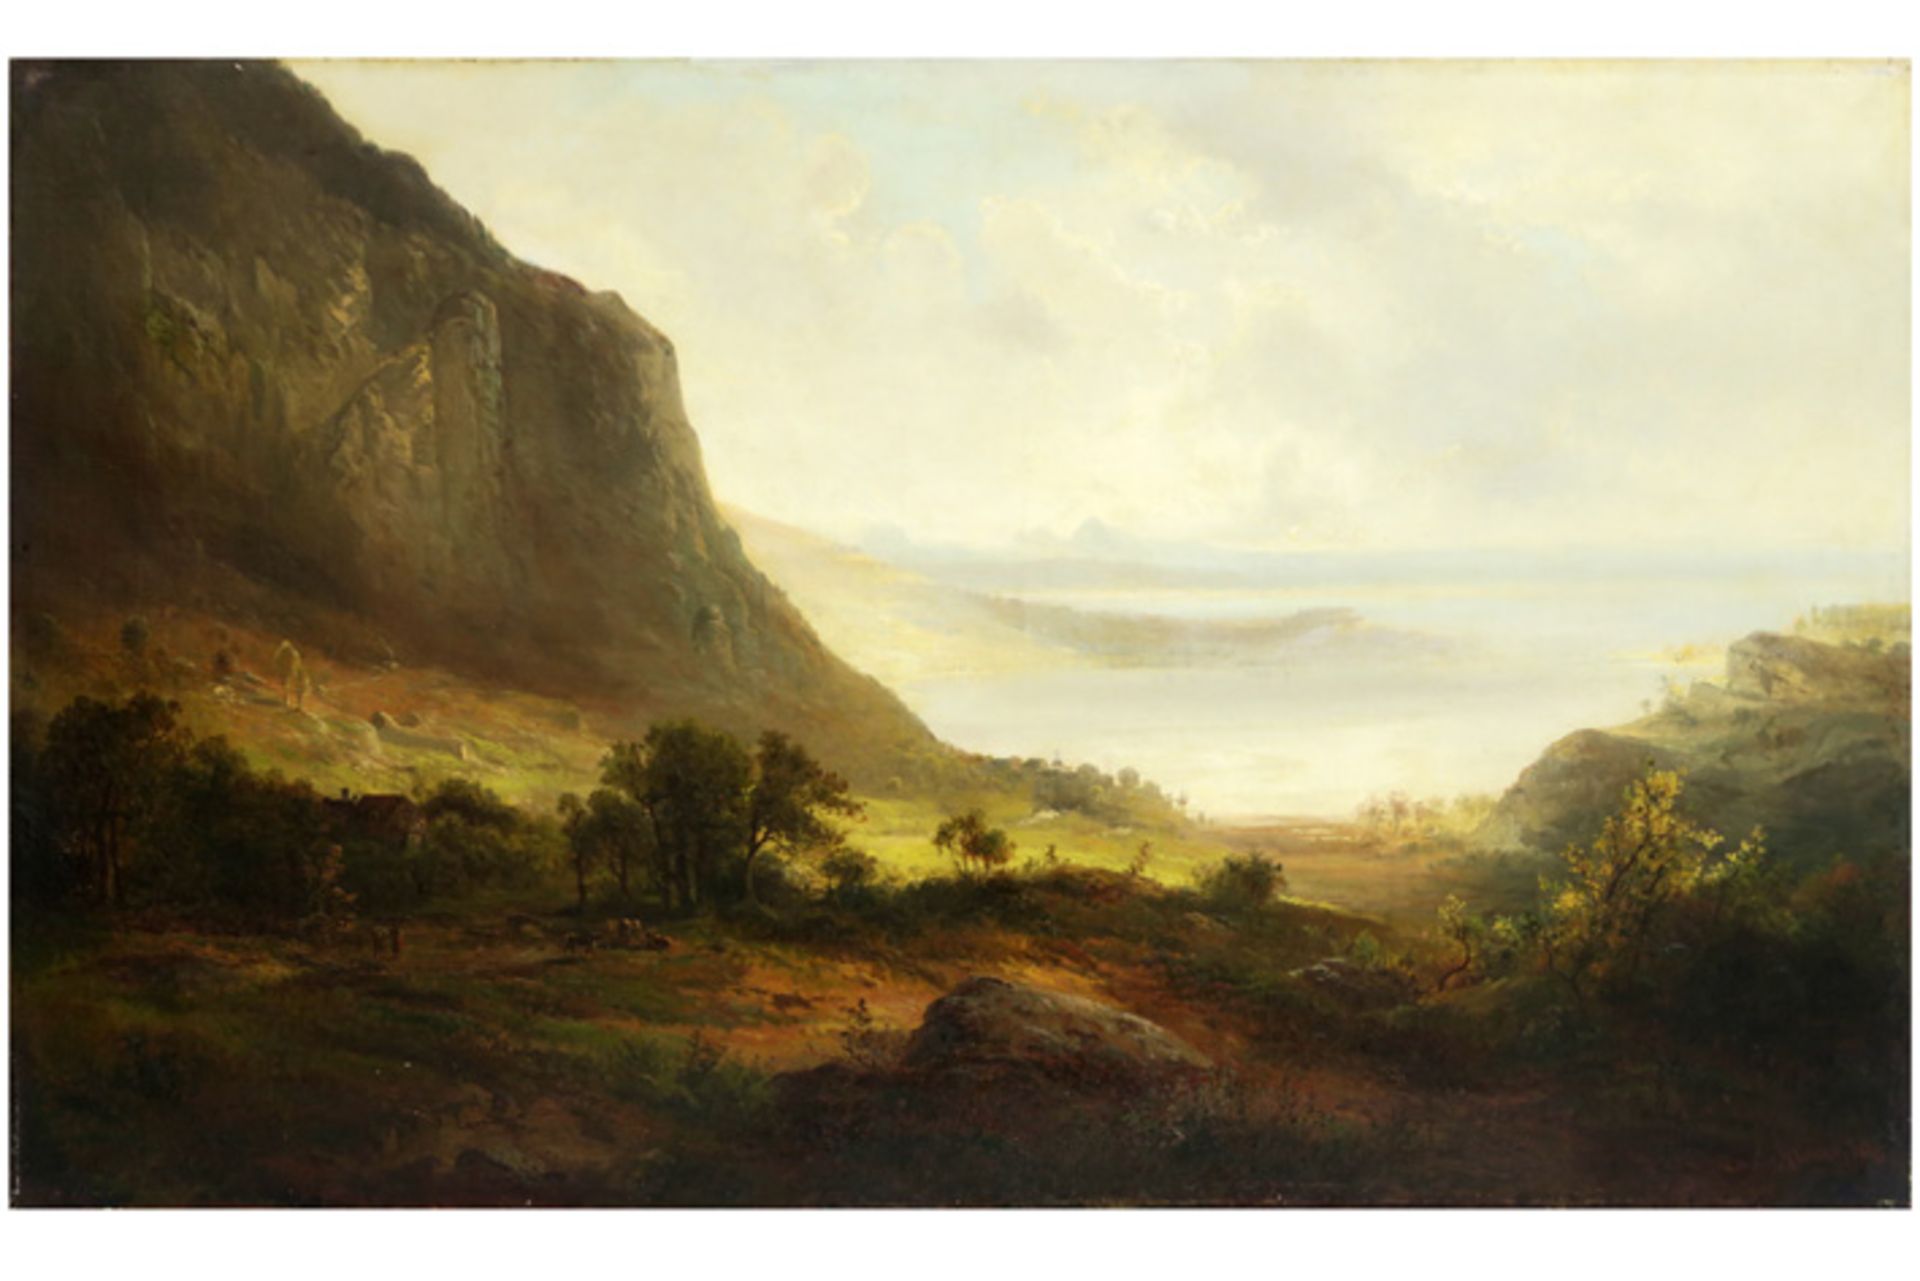 19th Cent. oil on canvas with an American landscape - signed "A. Kerner Ma" ('Ma' probably refers to